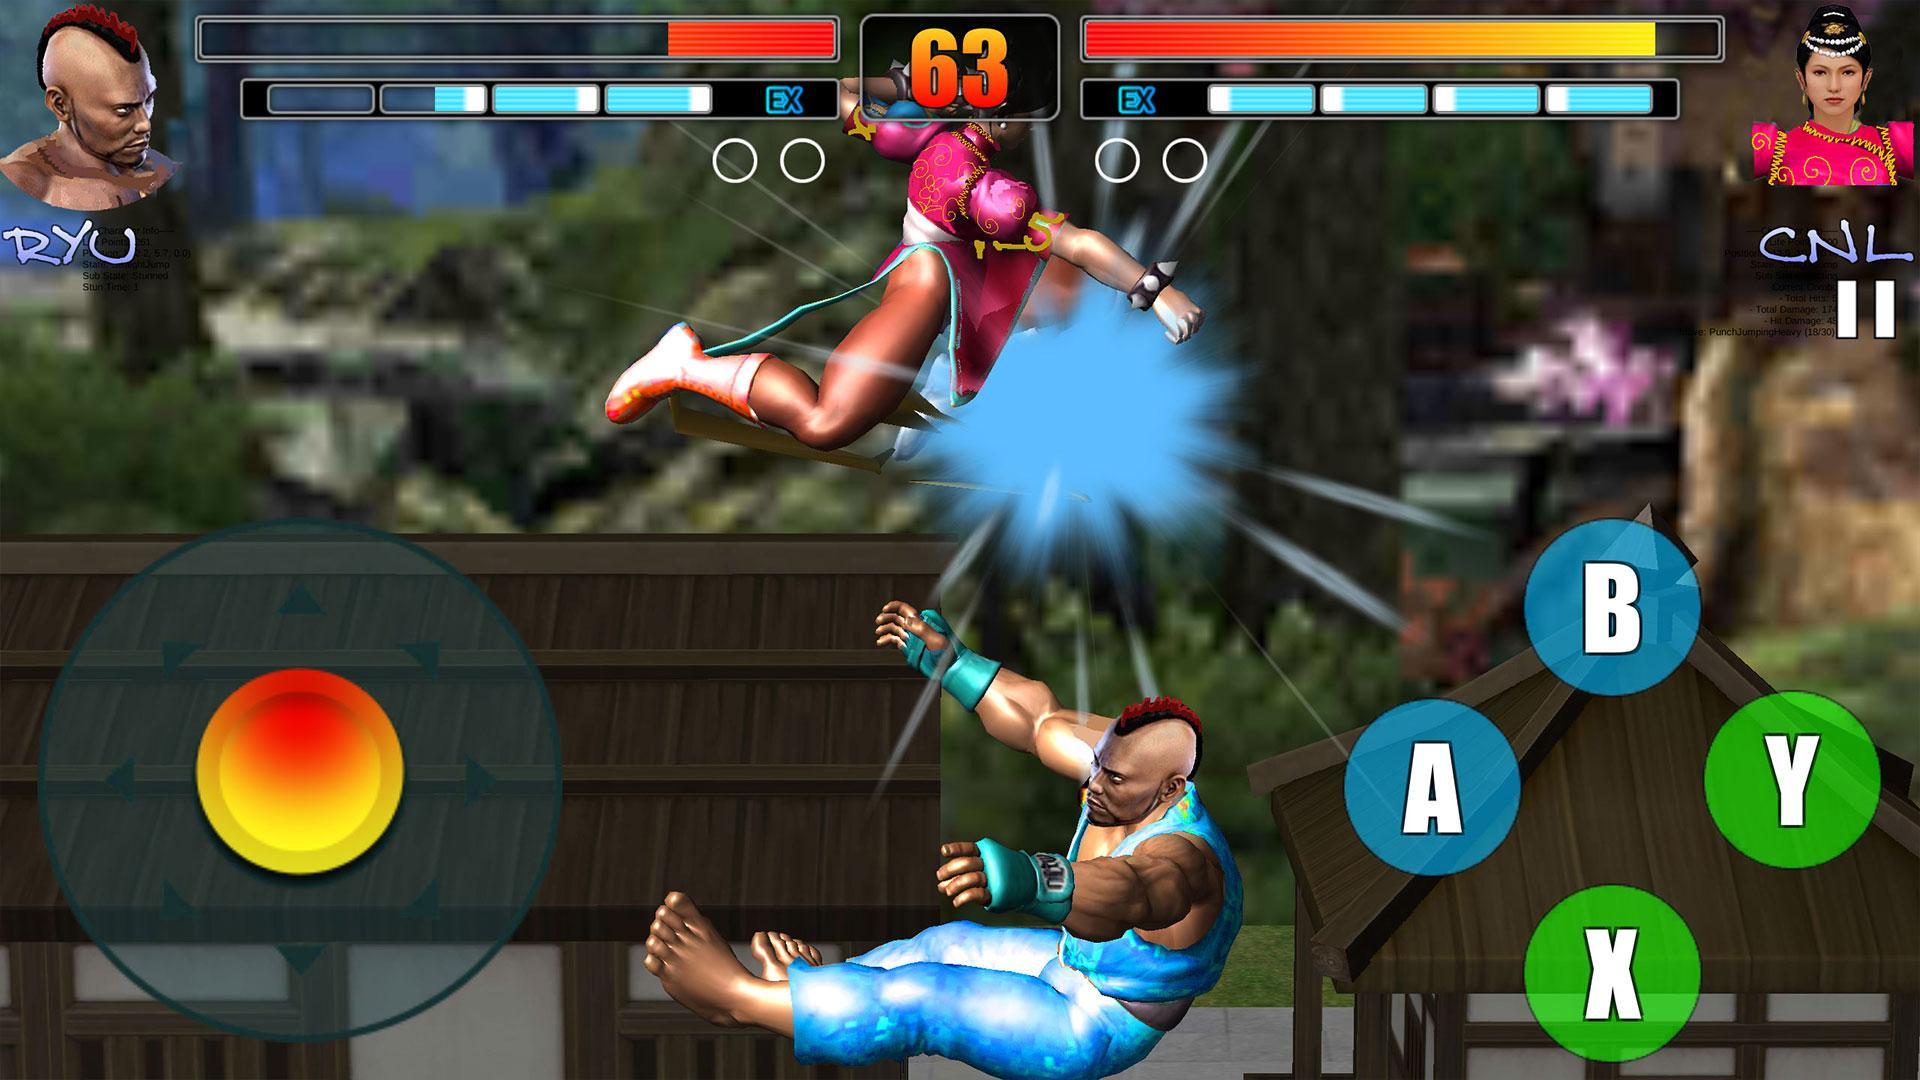 King of Street Fighters 3D for Android - APK Download